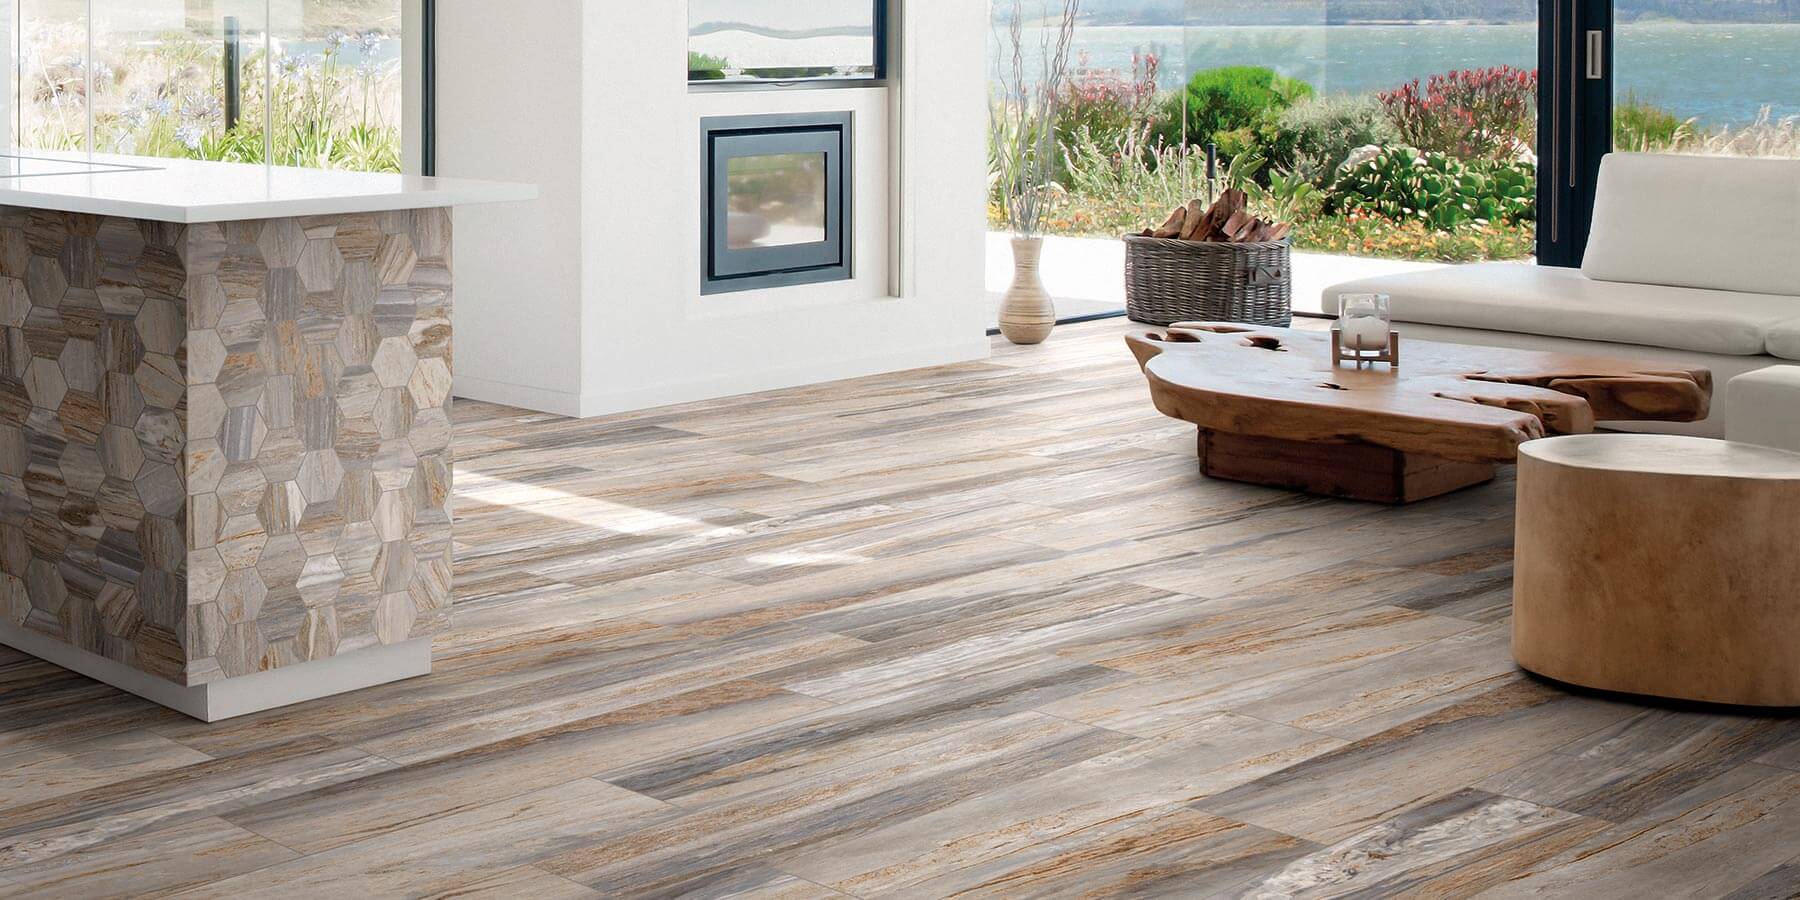 Porcelain Tile Flooring Pros and Cons